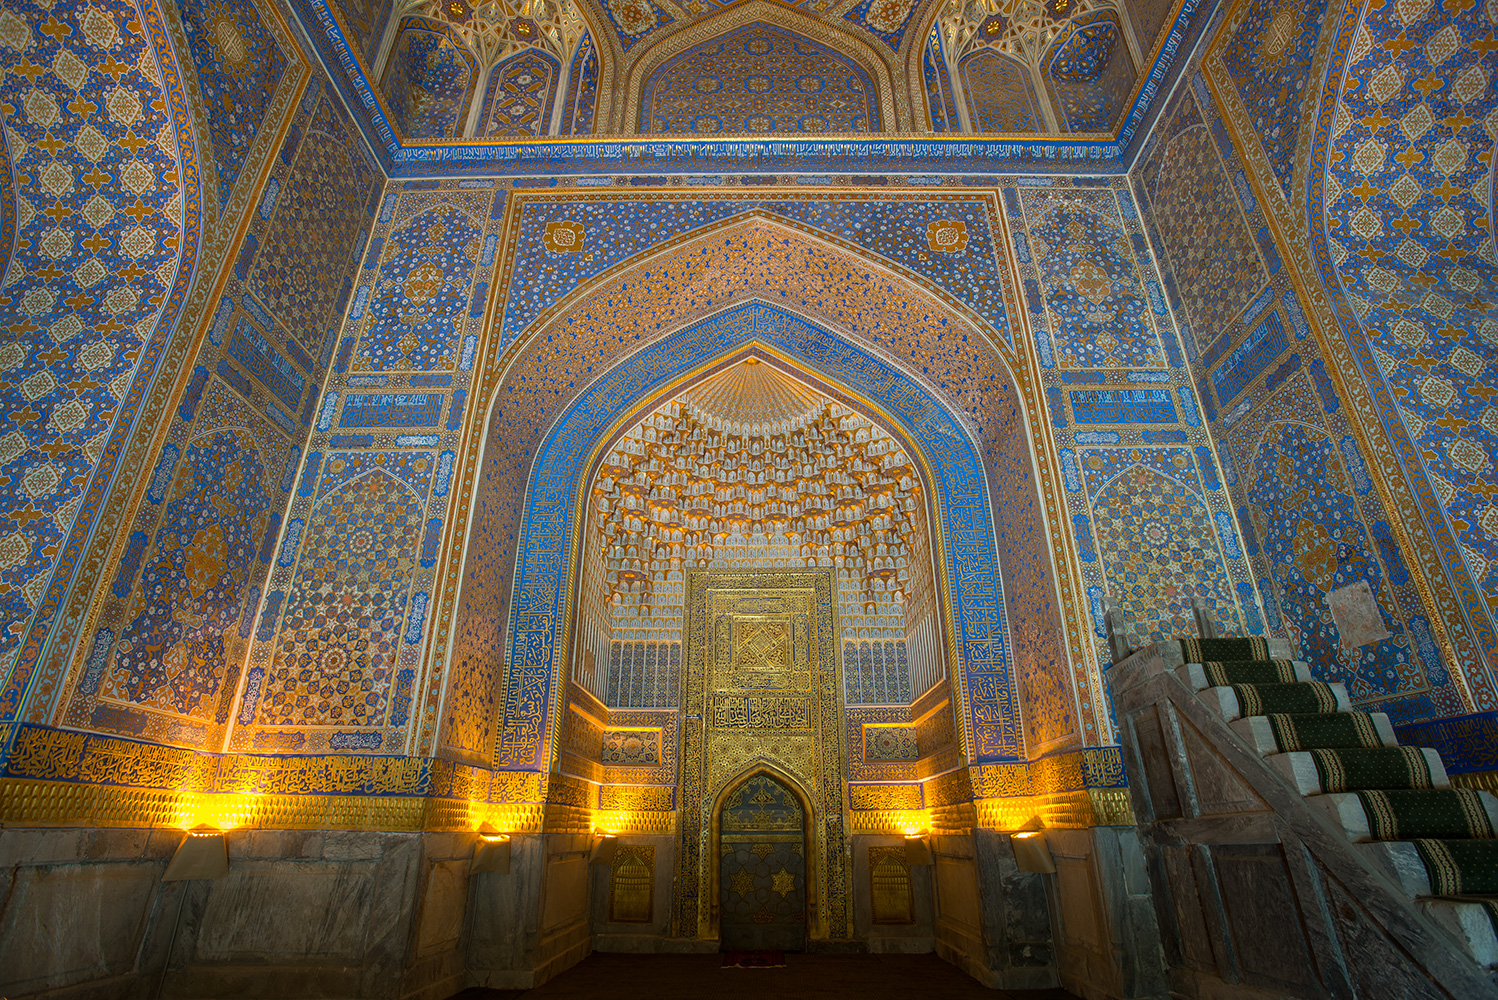 The mihrab and mosque interior